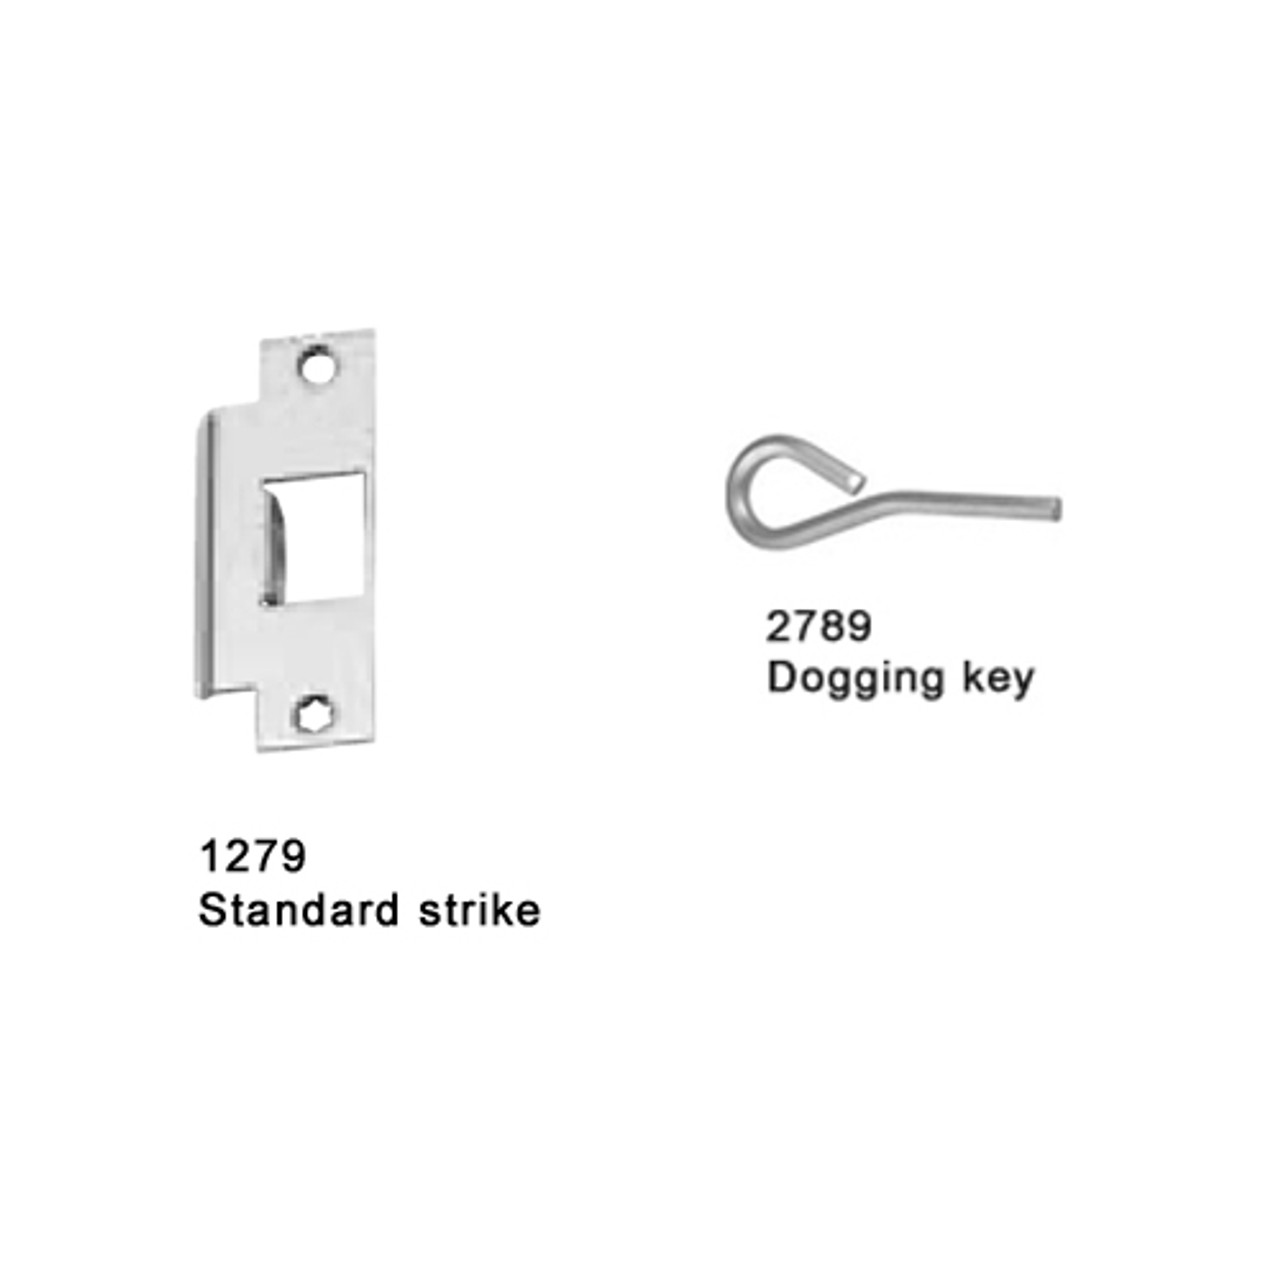 25-M-L-DT-DANE-US32D-4-LHR Falcon 25 Series Mortise Lock Devices 510L-DT Dane Lever Trim with Dummy Trim in Satin Stainless Steel